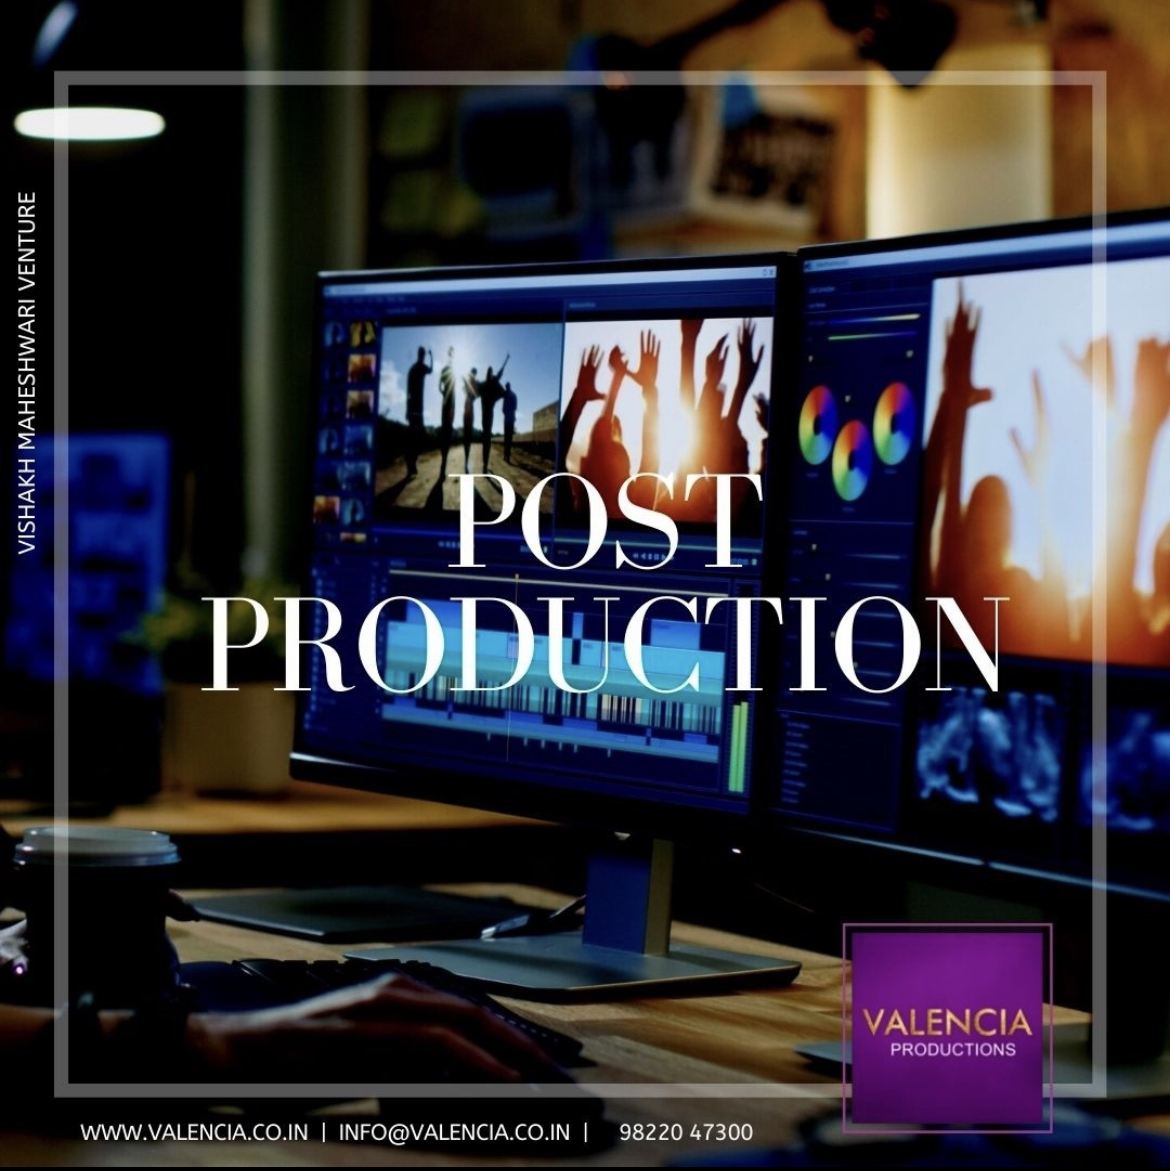 VALENCIA GROUP, FILM PRODUCTION COMPANY IN PUNE,BEST FILM PRODUCTION COMPANY IN PUNE / MUMBAI,CORPORATE FILM MAKER IN PUNE / MUMBAI,BEST CORPORATE FILM MAKING COMPANY IN PUNE / MUMBAI,FILM PRODUCTION SATUDIO IN PUNE 